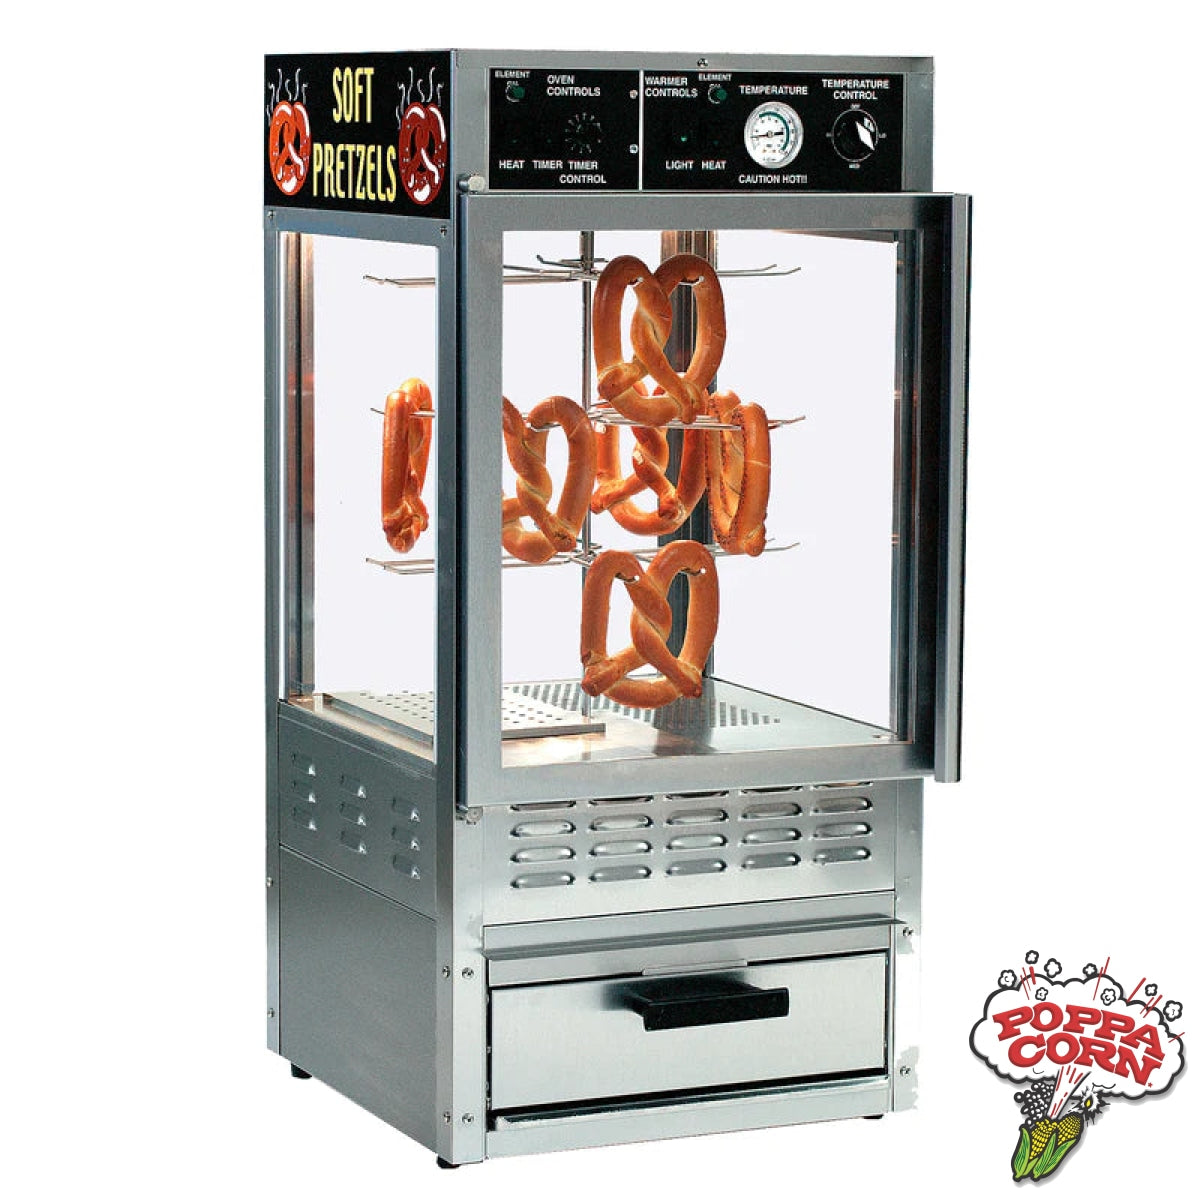 Oven/Warmer Combo For Pizza or Pretzels - GM5552-00-000 - Poppa Corn Corp